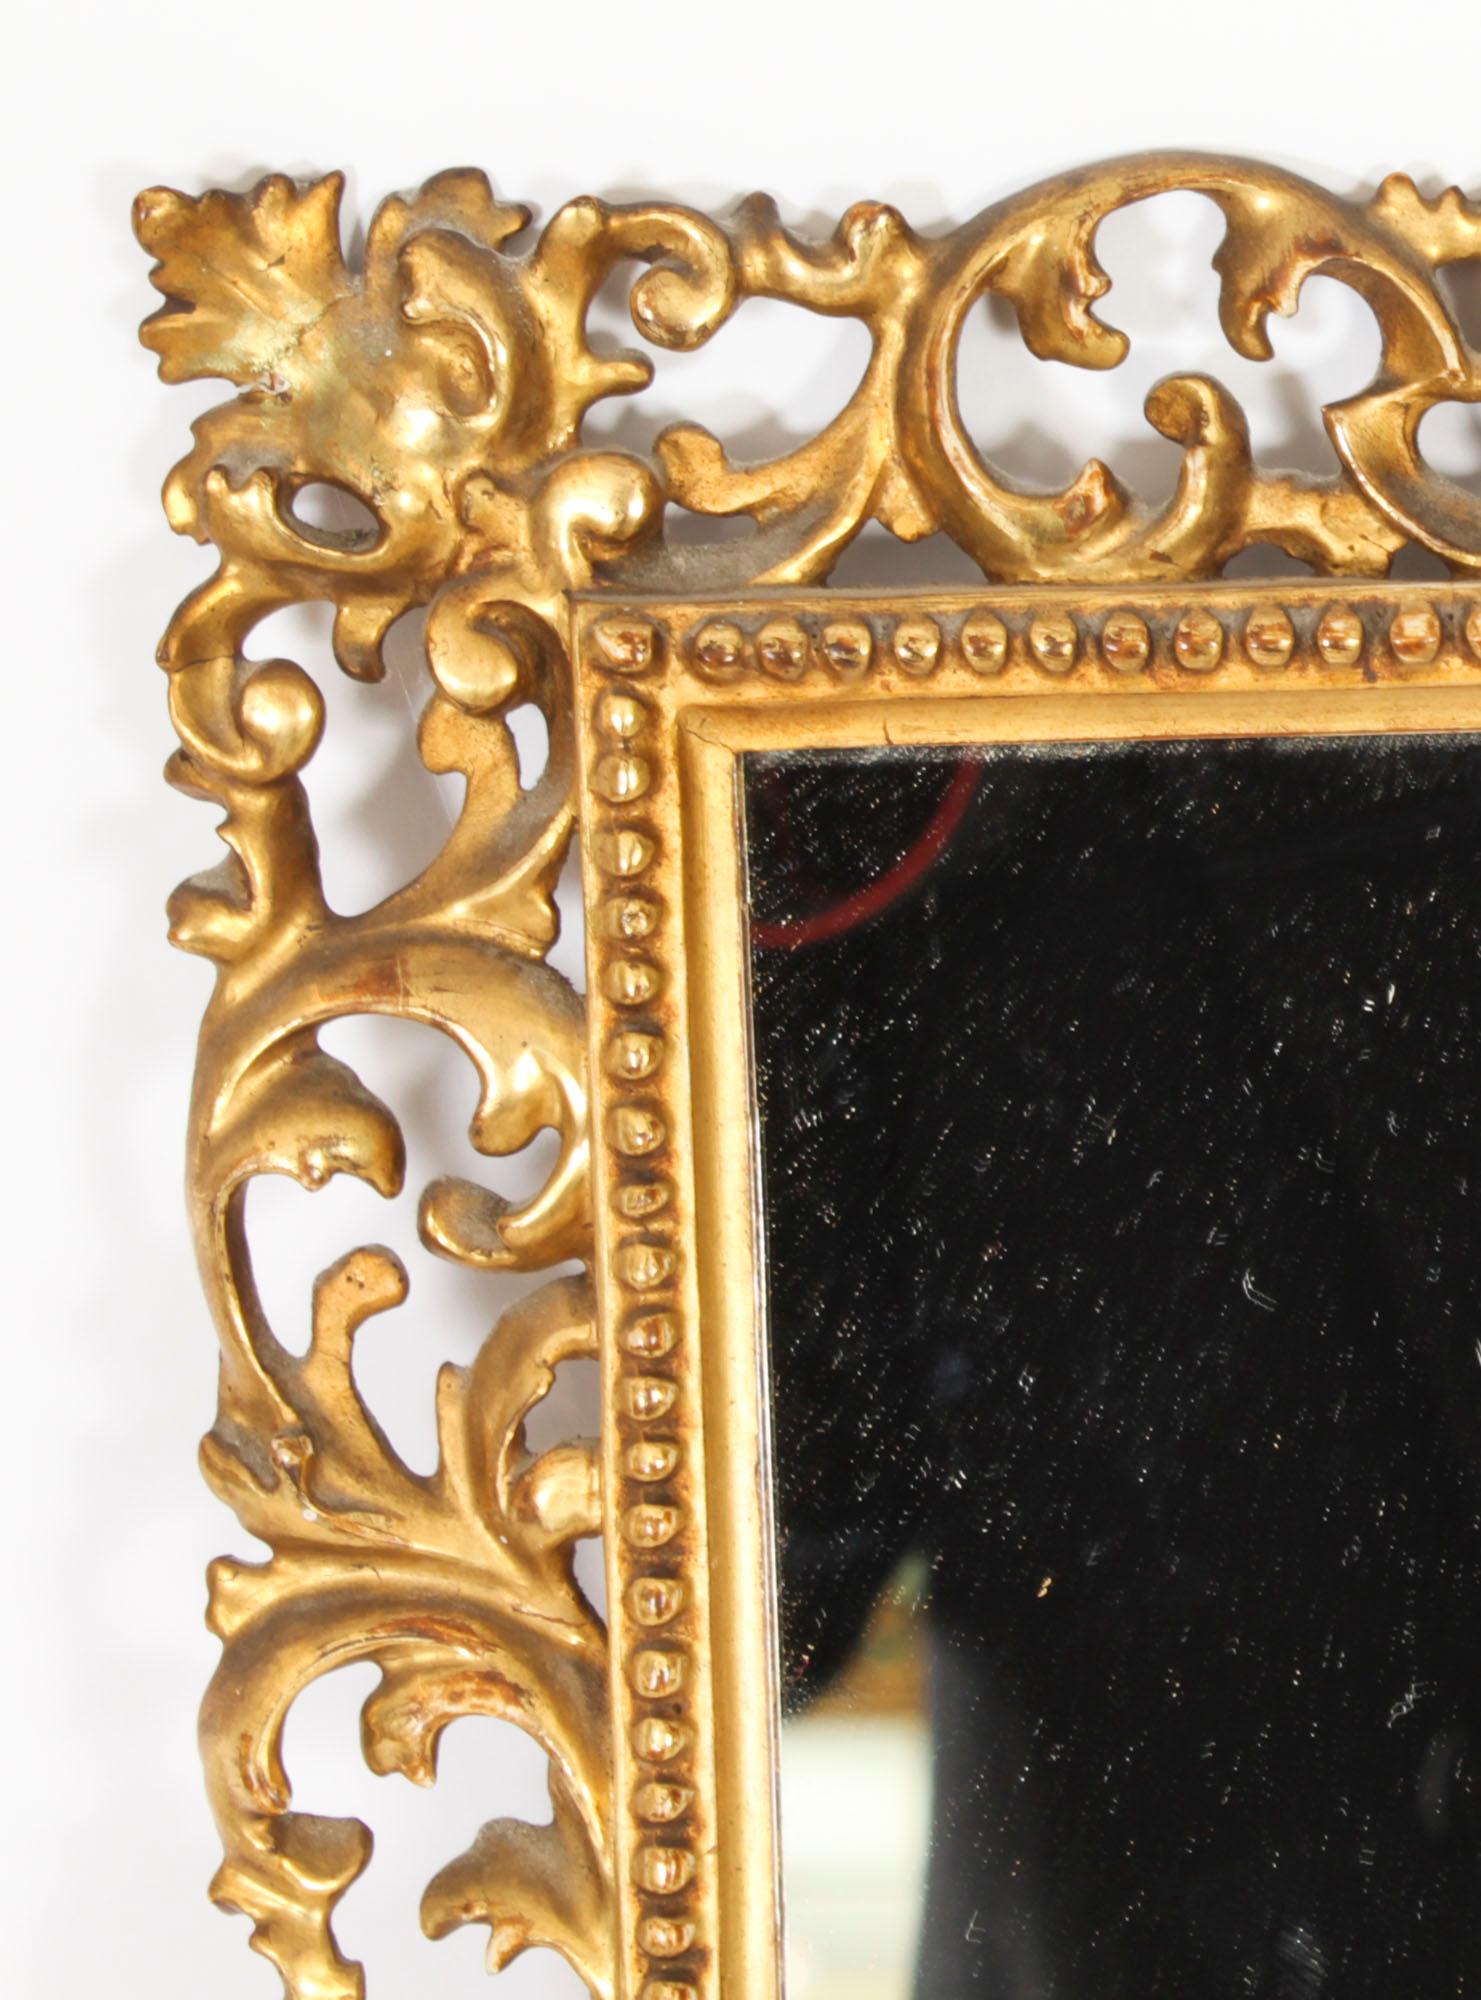 Antique Italian Giltwood Florentine Mirror 19th Century 40 x 30cm In Good Condition For Sale In London, GB